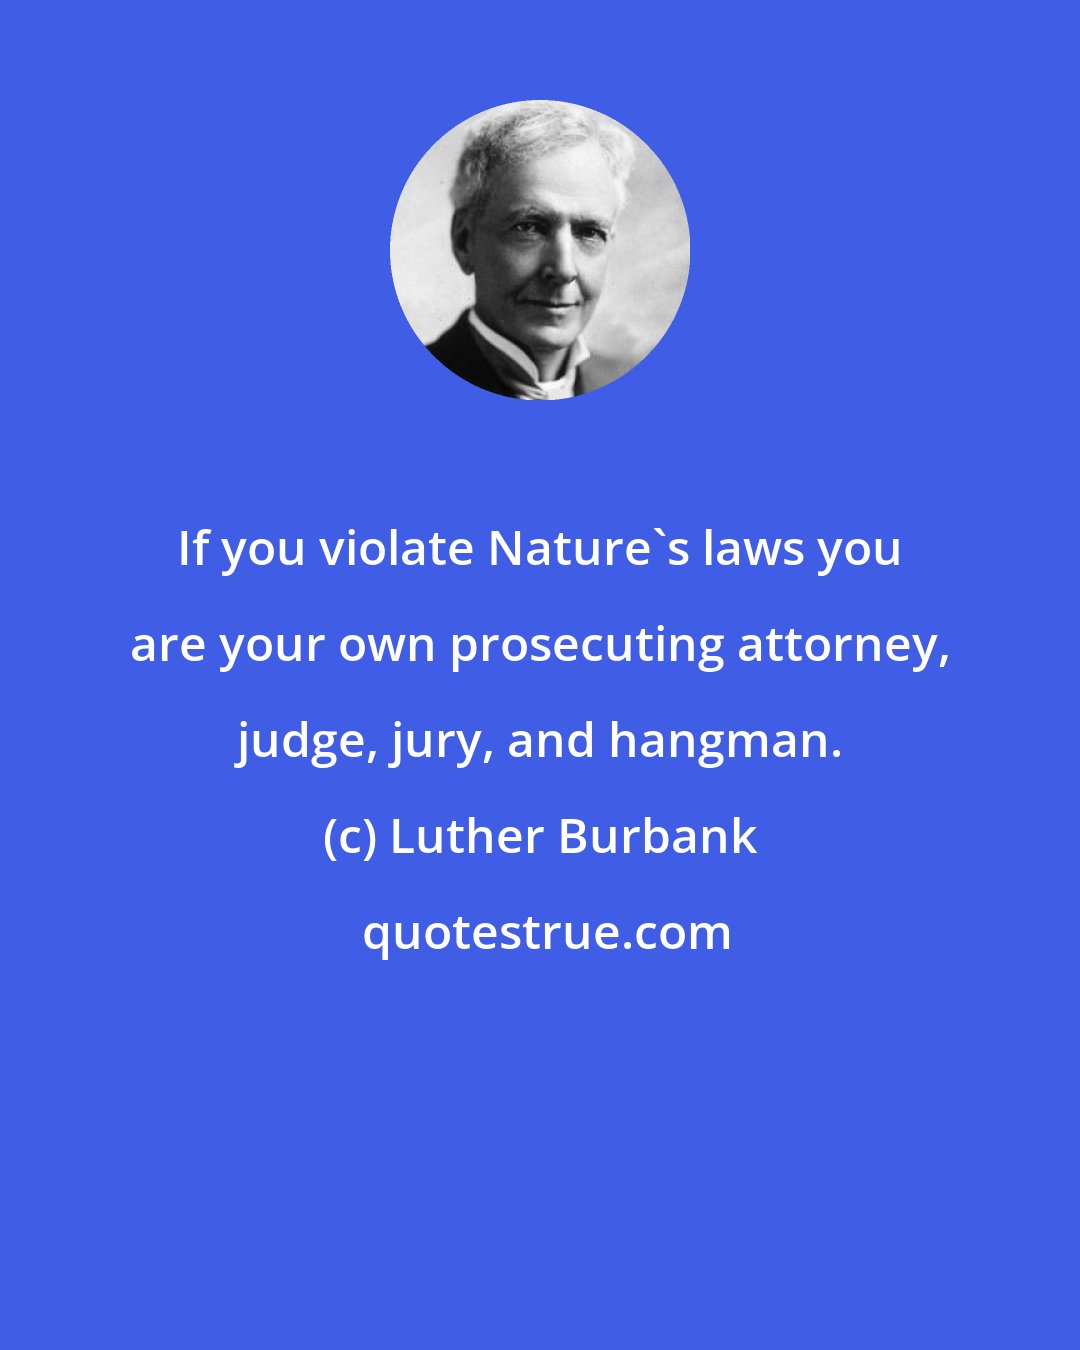 Luther Burbank: If you violate Nature's laws you are your own prosecuting attorney, judge, jury, and hangman.